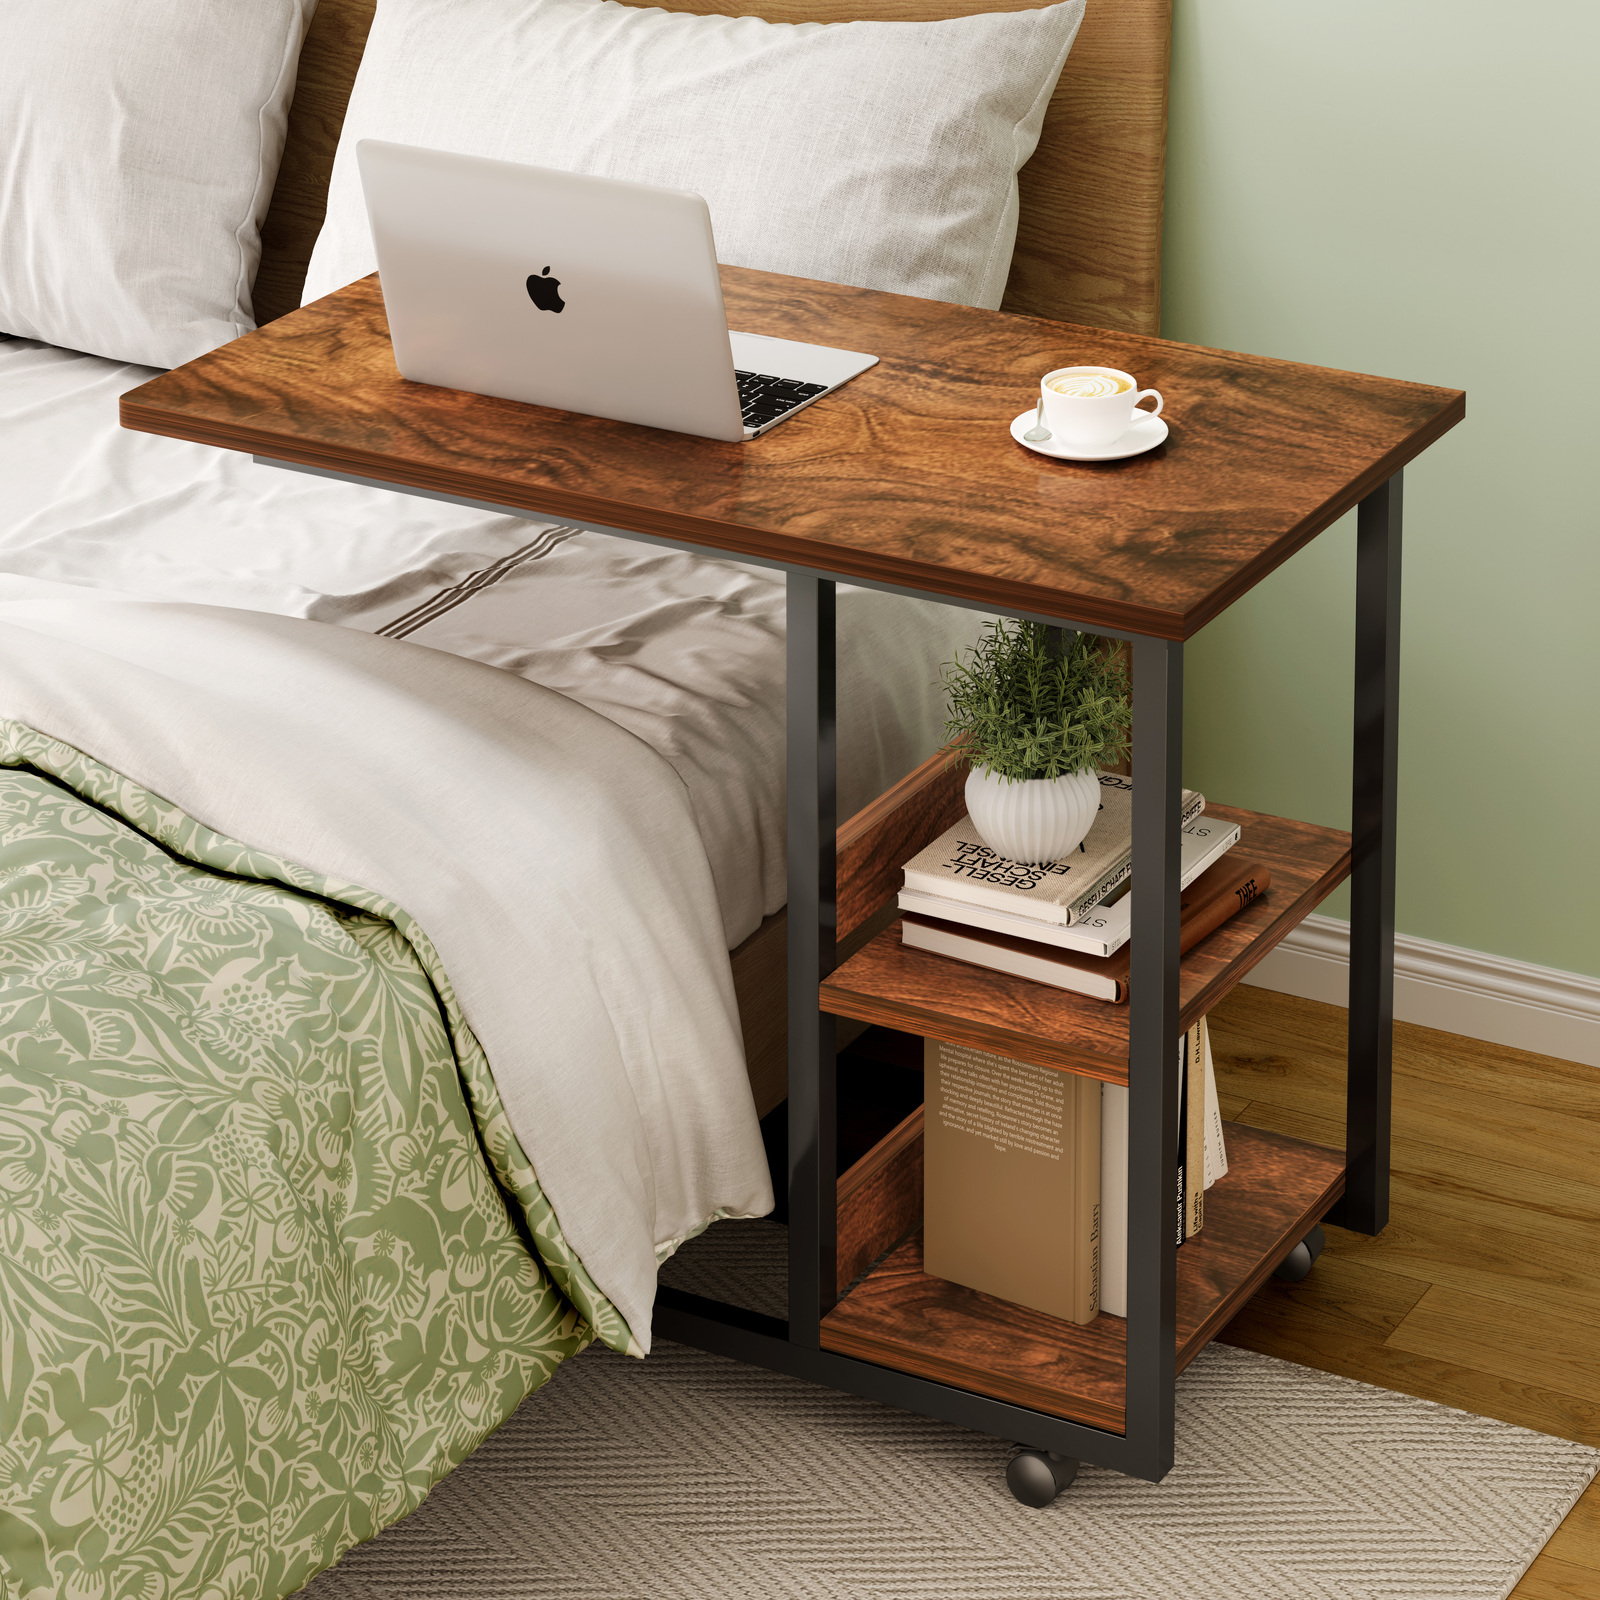 Supreme Sofa Bed Side Table Laptop Desk with Shelves & Wheels (Rustic Wood)